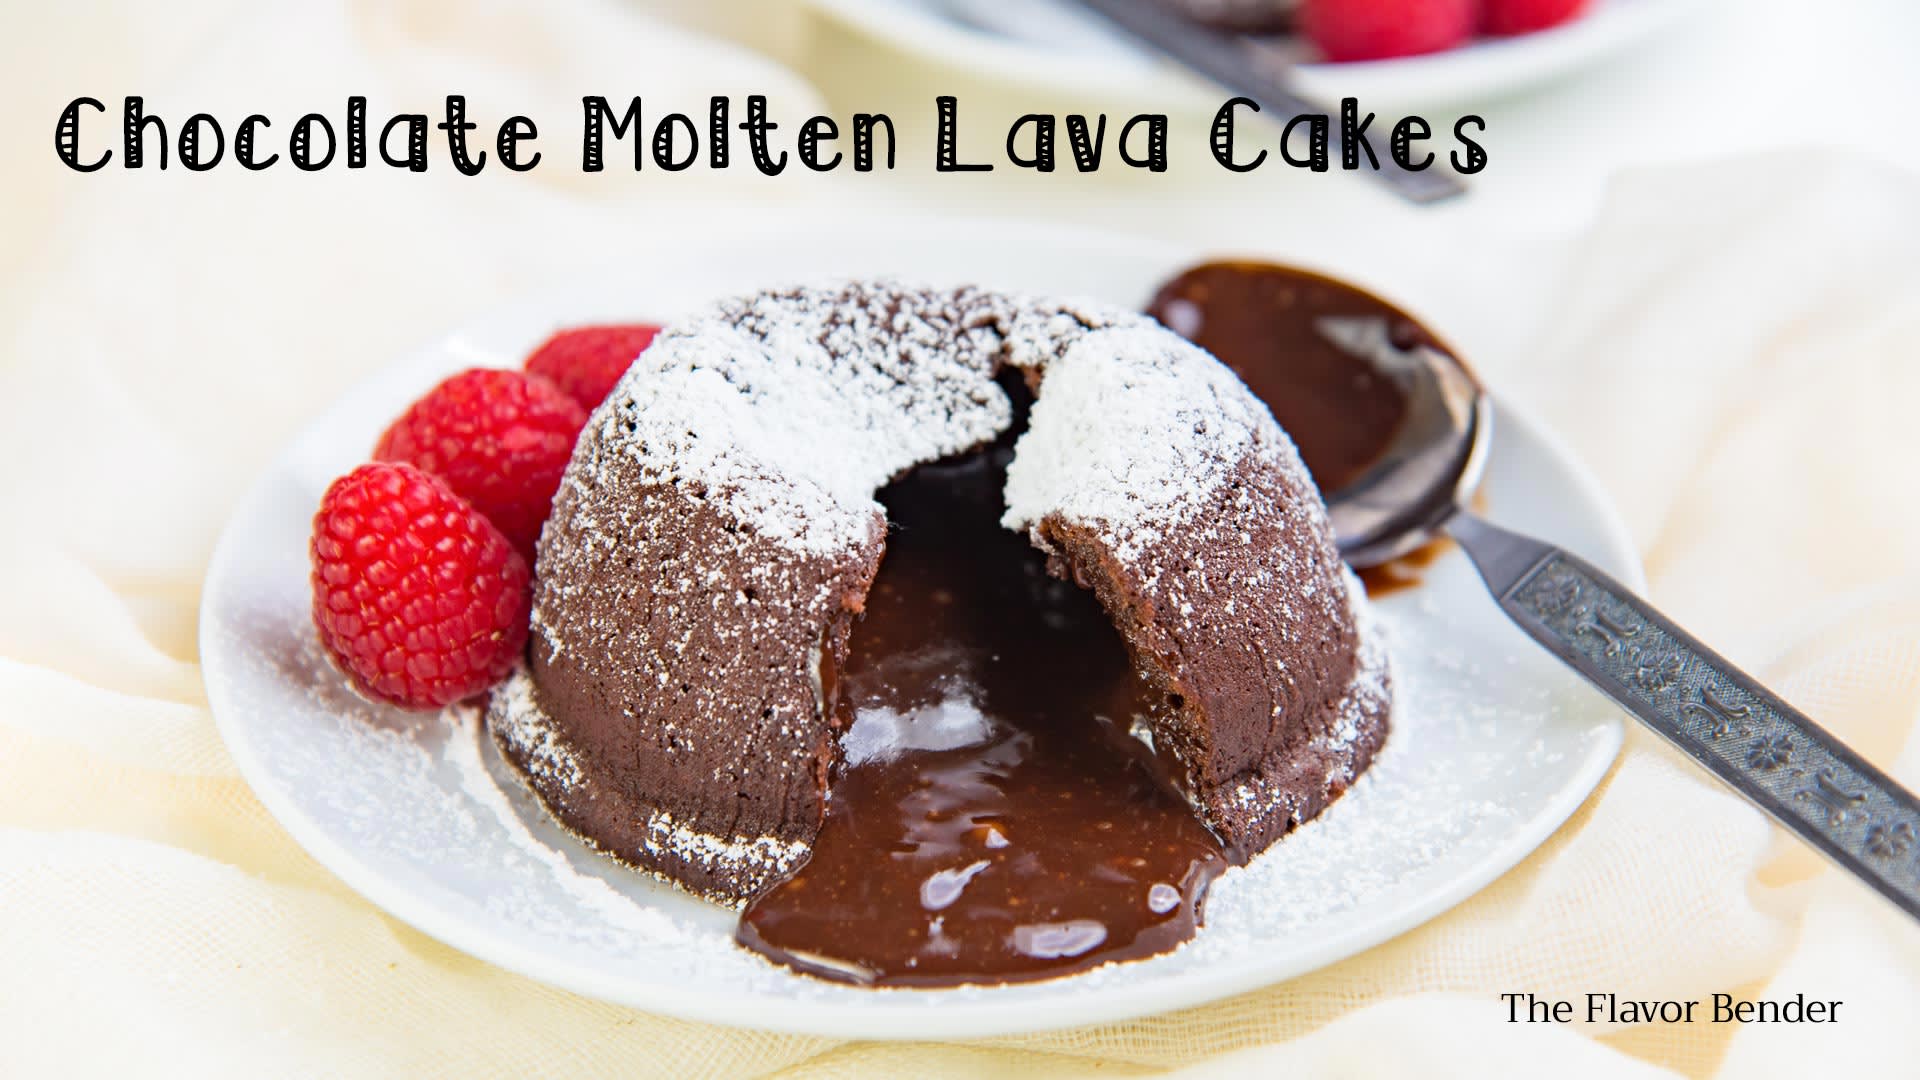 Chocolate Lava Cake with Salted Caramel - The Endless Meal®